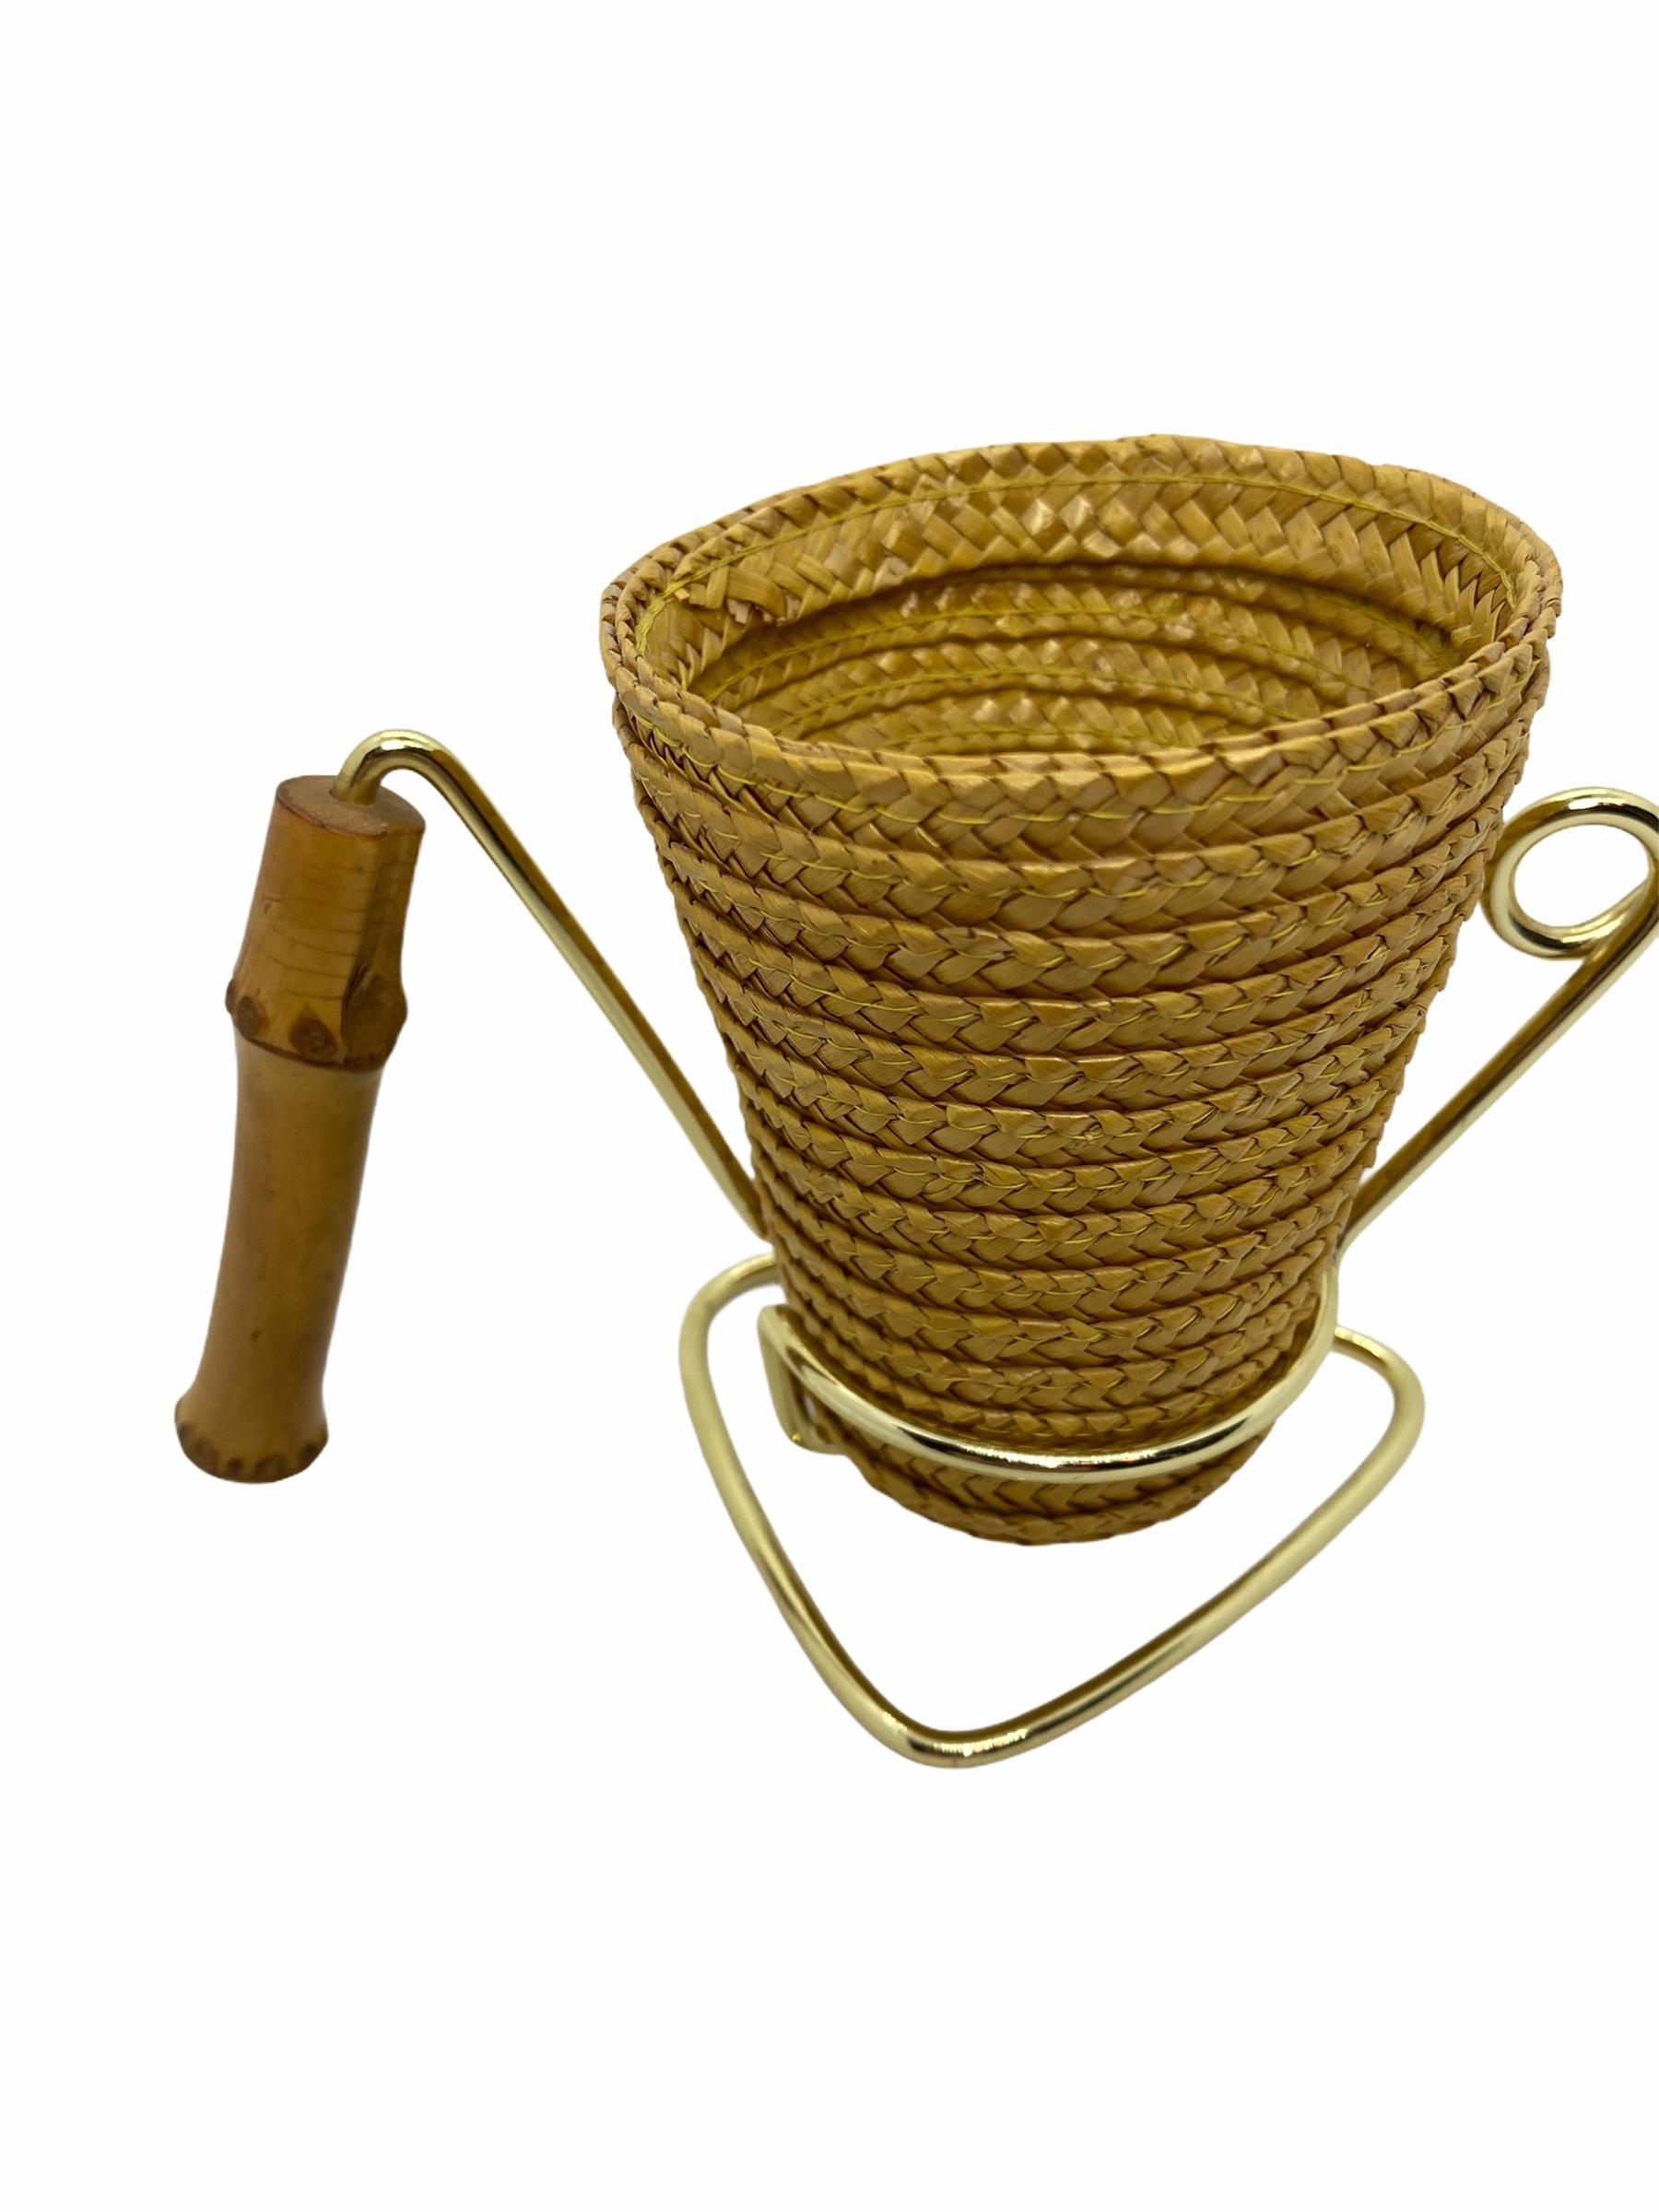 This lovely piece is typical, 1950s. The basket is for salt sticks or nuts and the golden metal stand is for pretzels.
The handle is made of bamboo. The metal holder is in gold.
The set is in very good condition. There are no damages. A nice